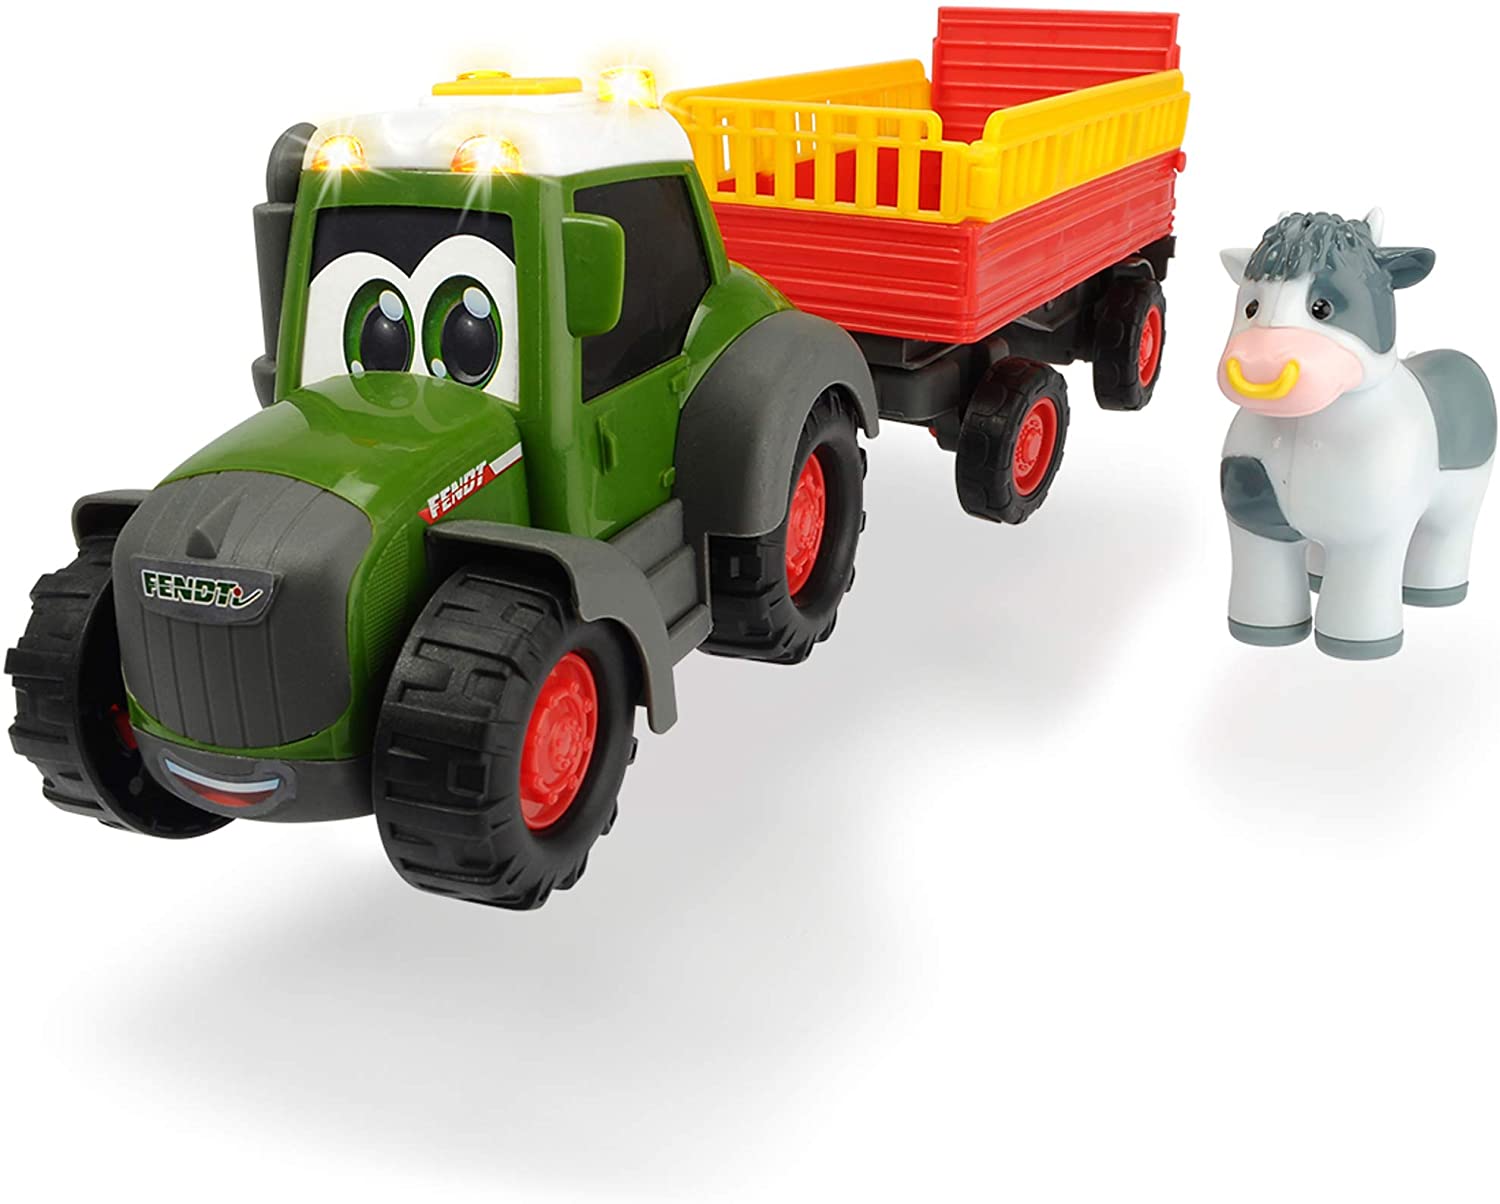 Gallery Of Dickie Toys Happy Animal Trailer Tractor For Age 1 Tractor With 